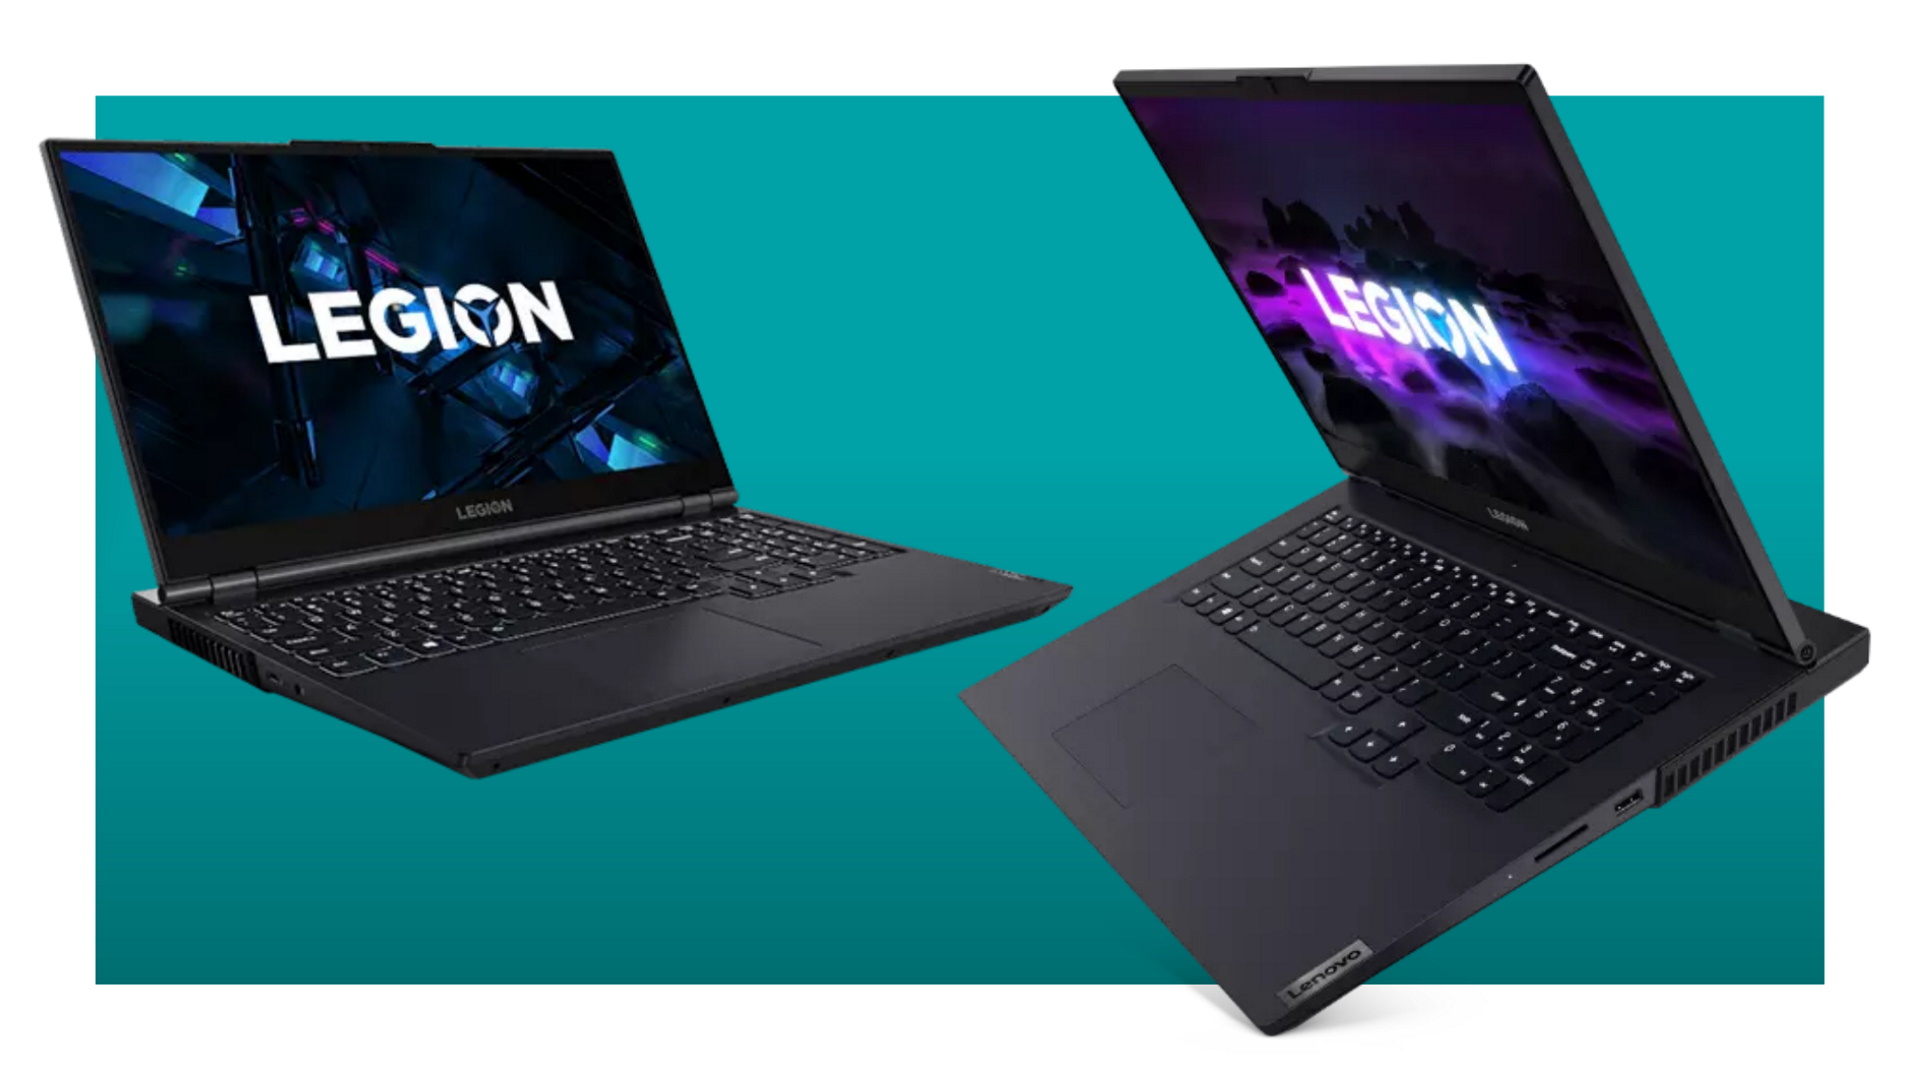  Save up to $300 on these RTX 3060 Lenovo laptops right now 